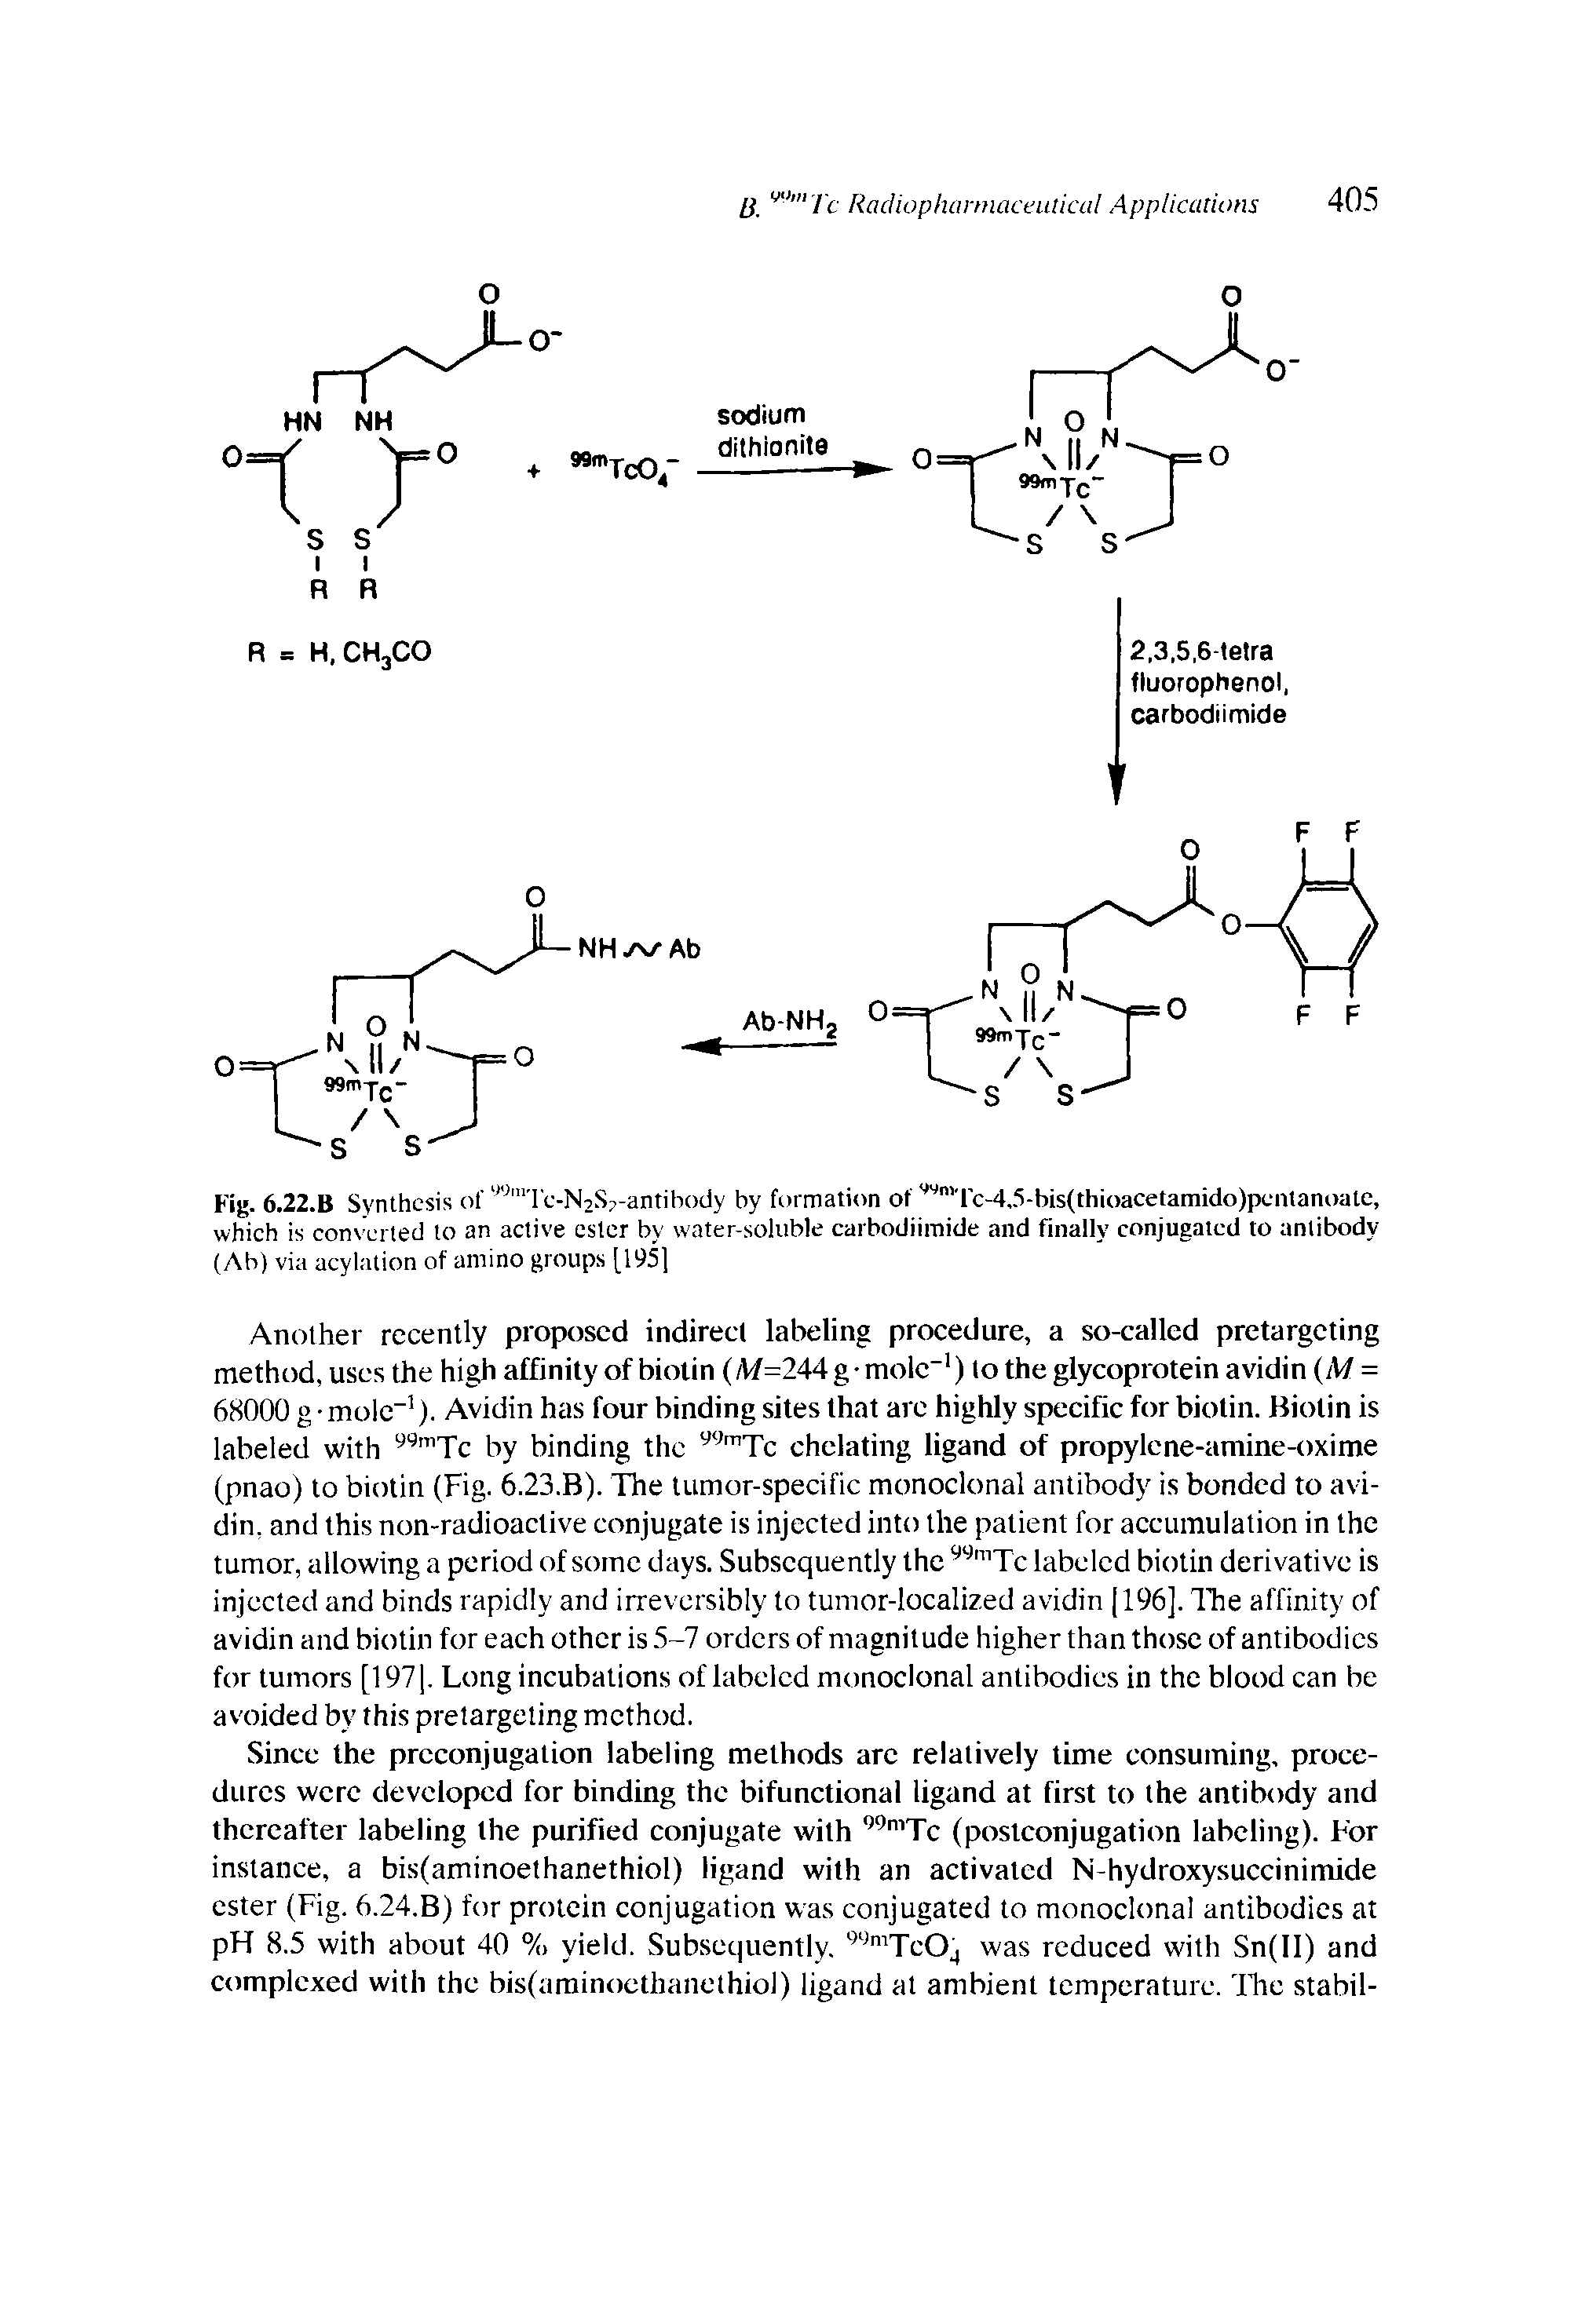 Fig. 6.22.B Synthesis ofrc-N2Sp-antihody by formation of " Tc-4,. i-bis(thioacetamido)pcntanoatc, which is con cited to an active ester by water-soluble carbodiimide and finally conjugated to antibody (Ab) via acylation of amino groups [195]...